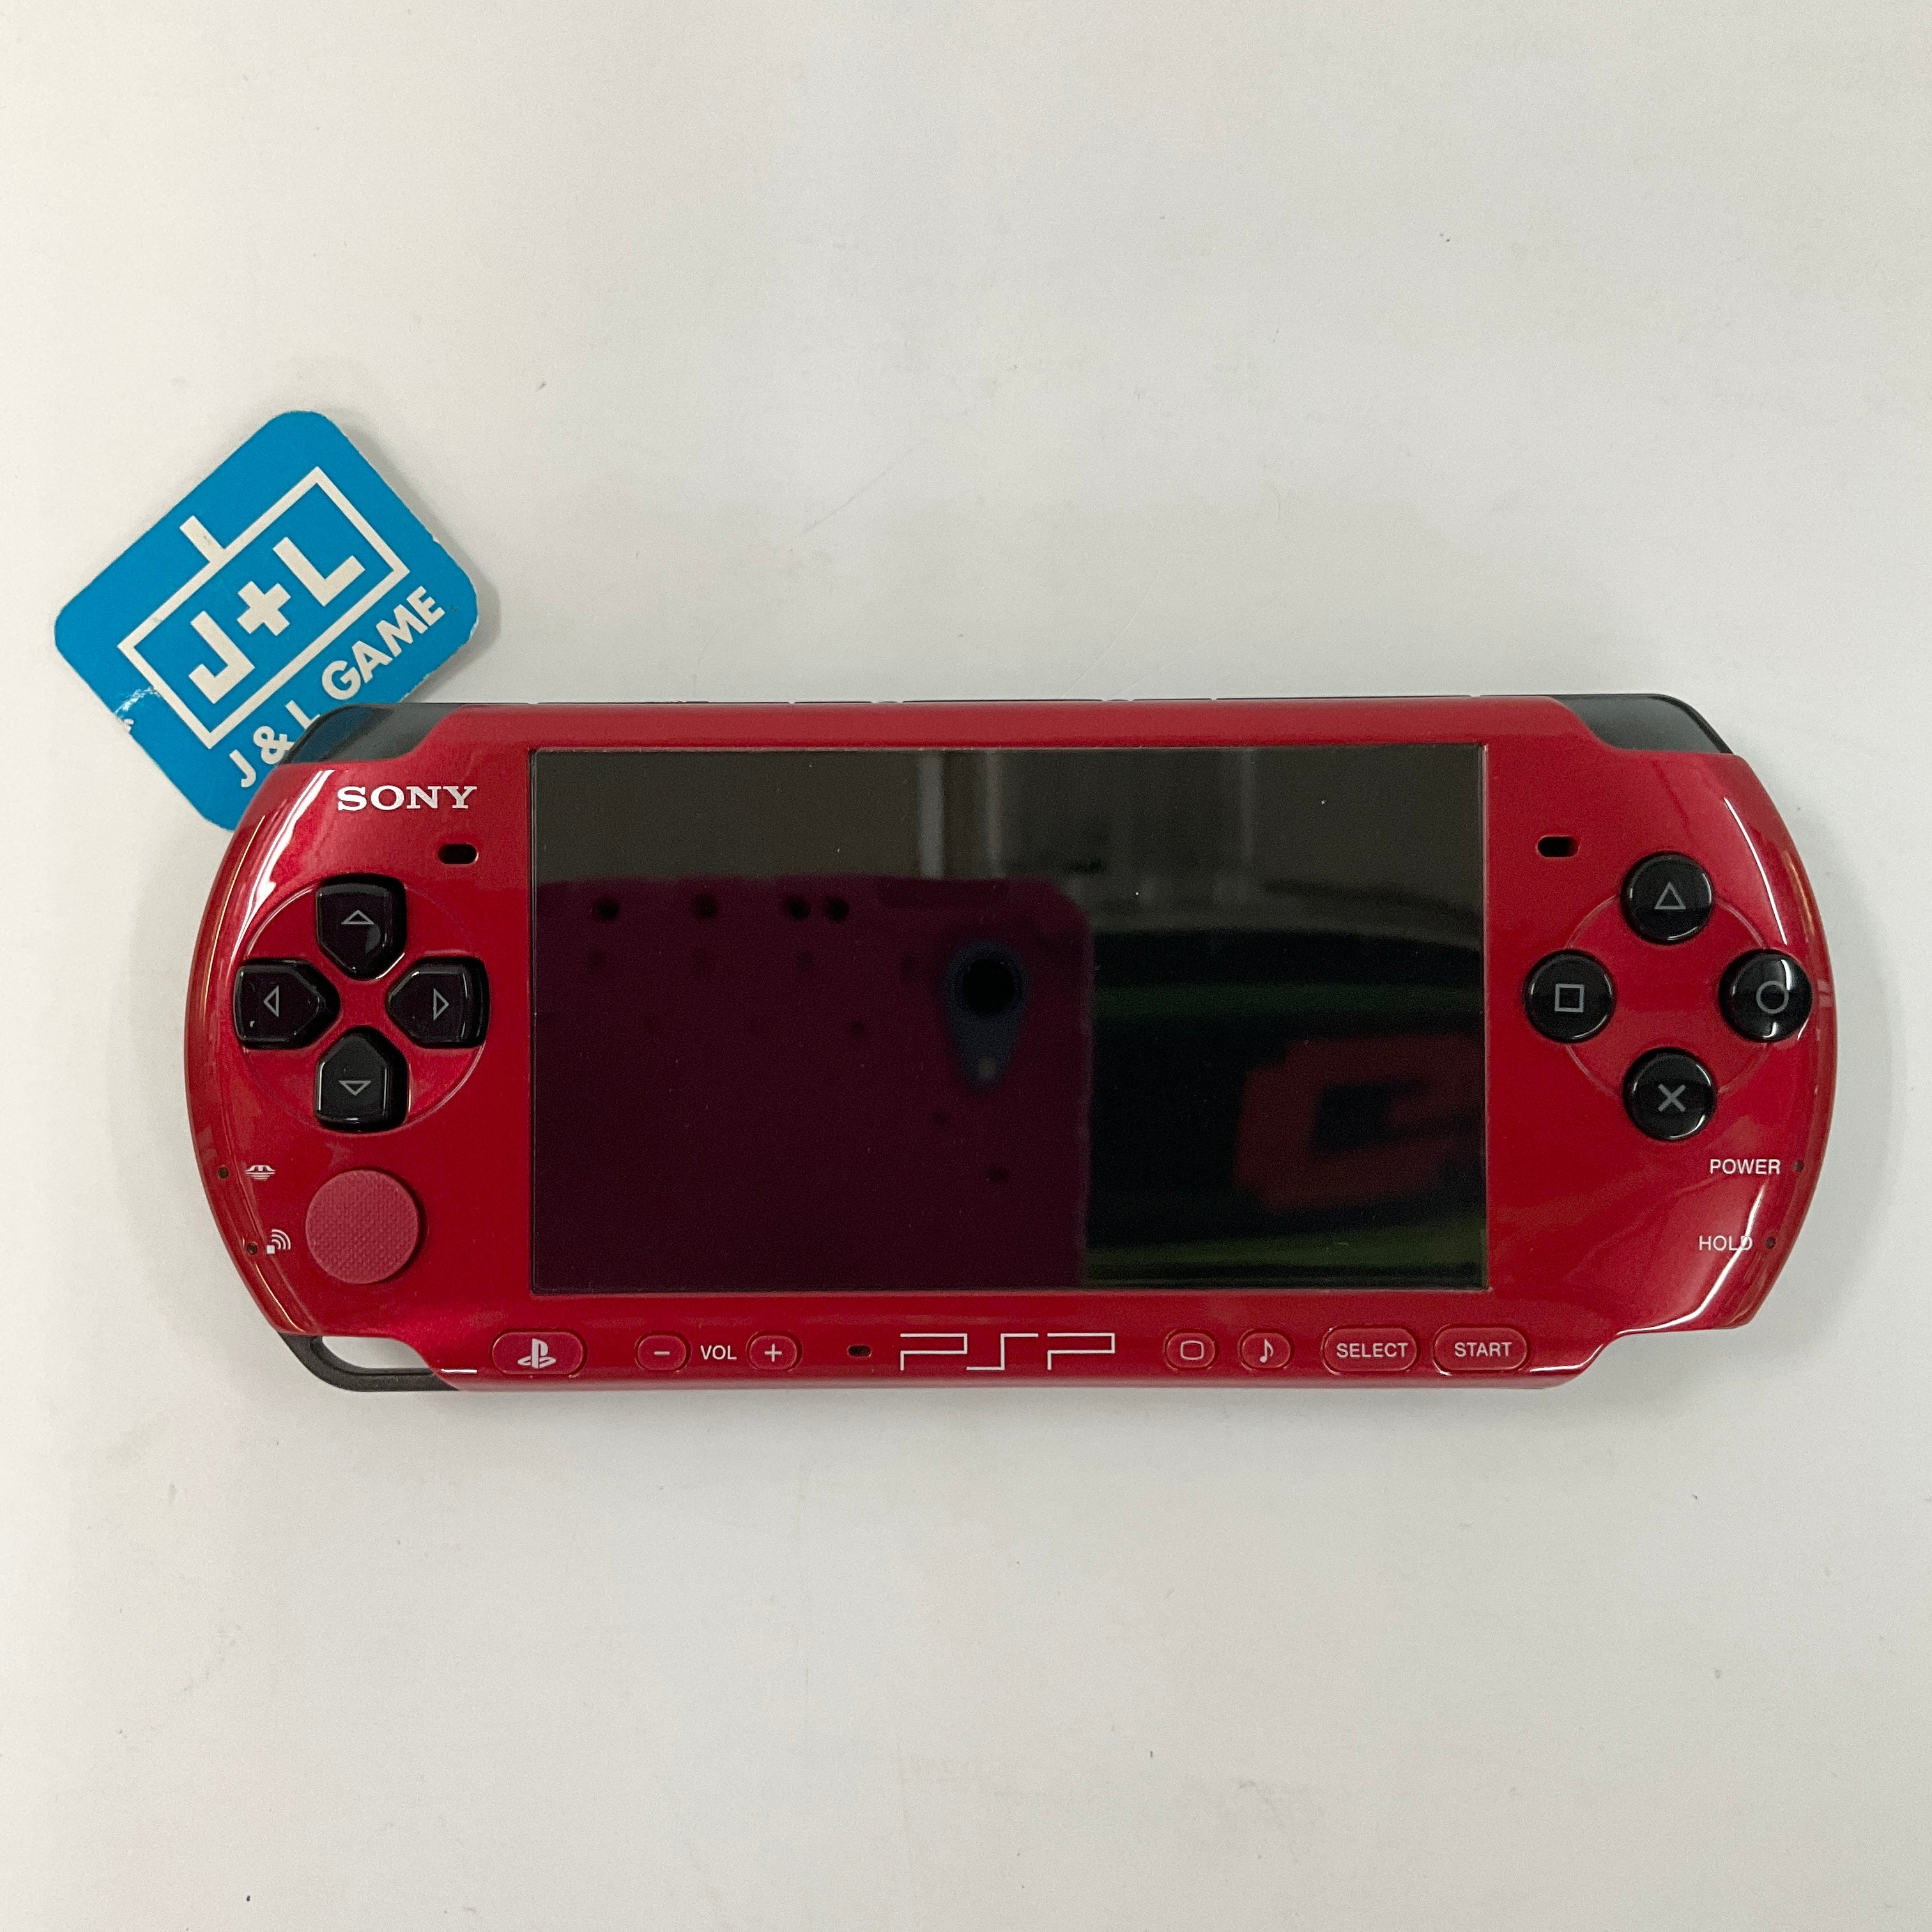 SONY PSP Playstation Portable Value Pack (Red/Black) - Sony PSP [Pre-Owned] (Japanese Import) Consoles Sony   